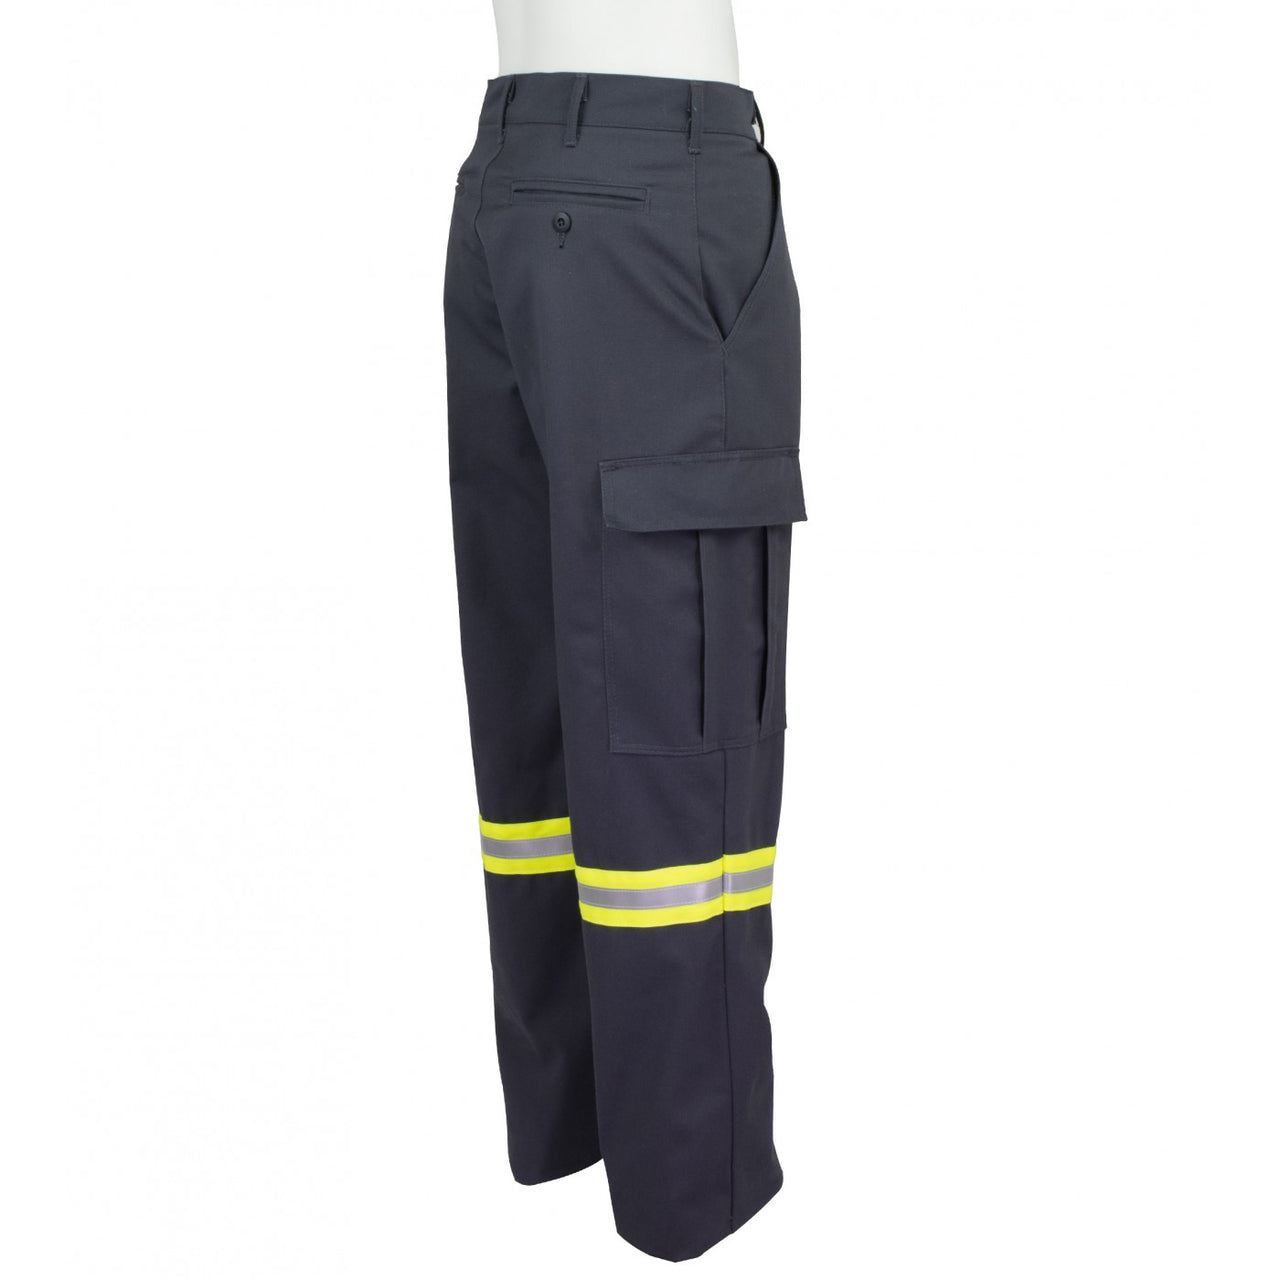 FR Charcoal Gray Cargo Pant W/ Reflective Striping